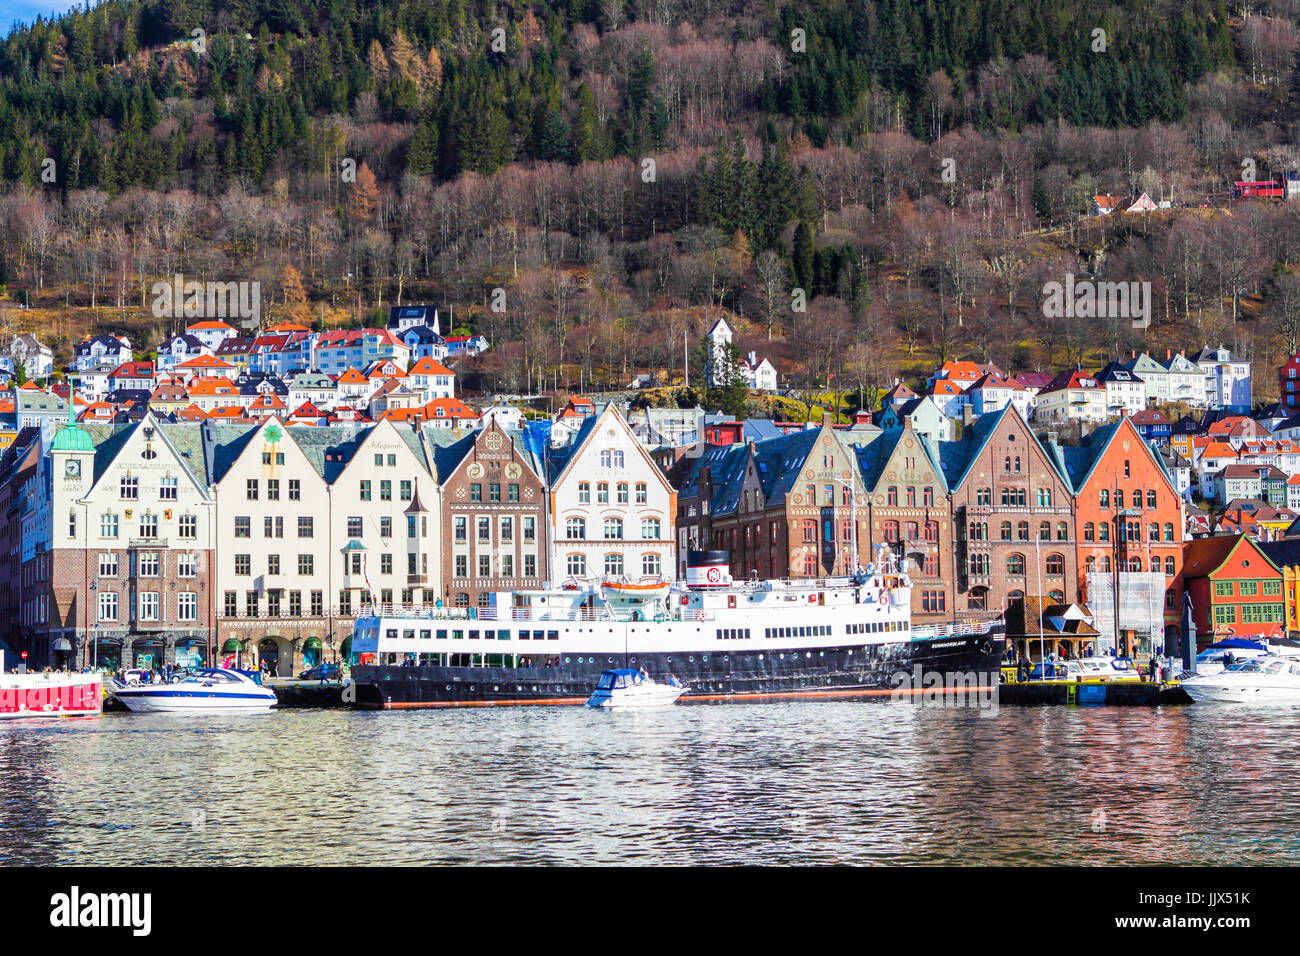 Bryggen district - Tourist attraction and Unesco World Heritage site with old wooden buildings. Bergen. Norway. Stock Photo